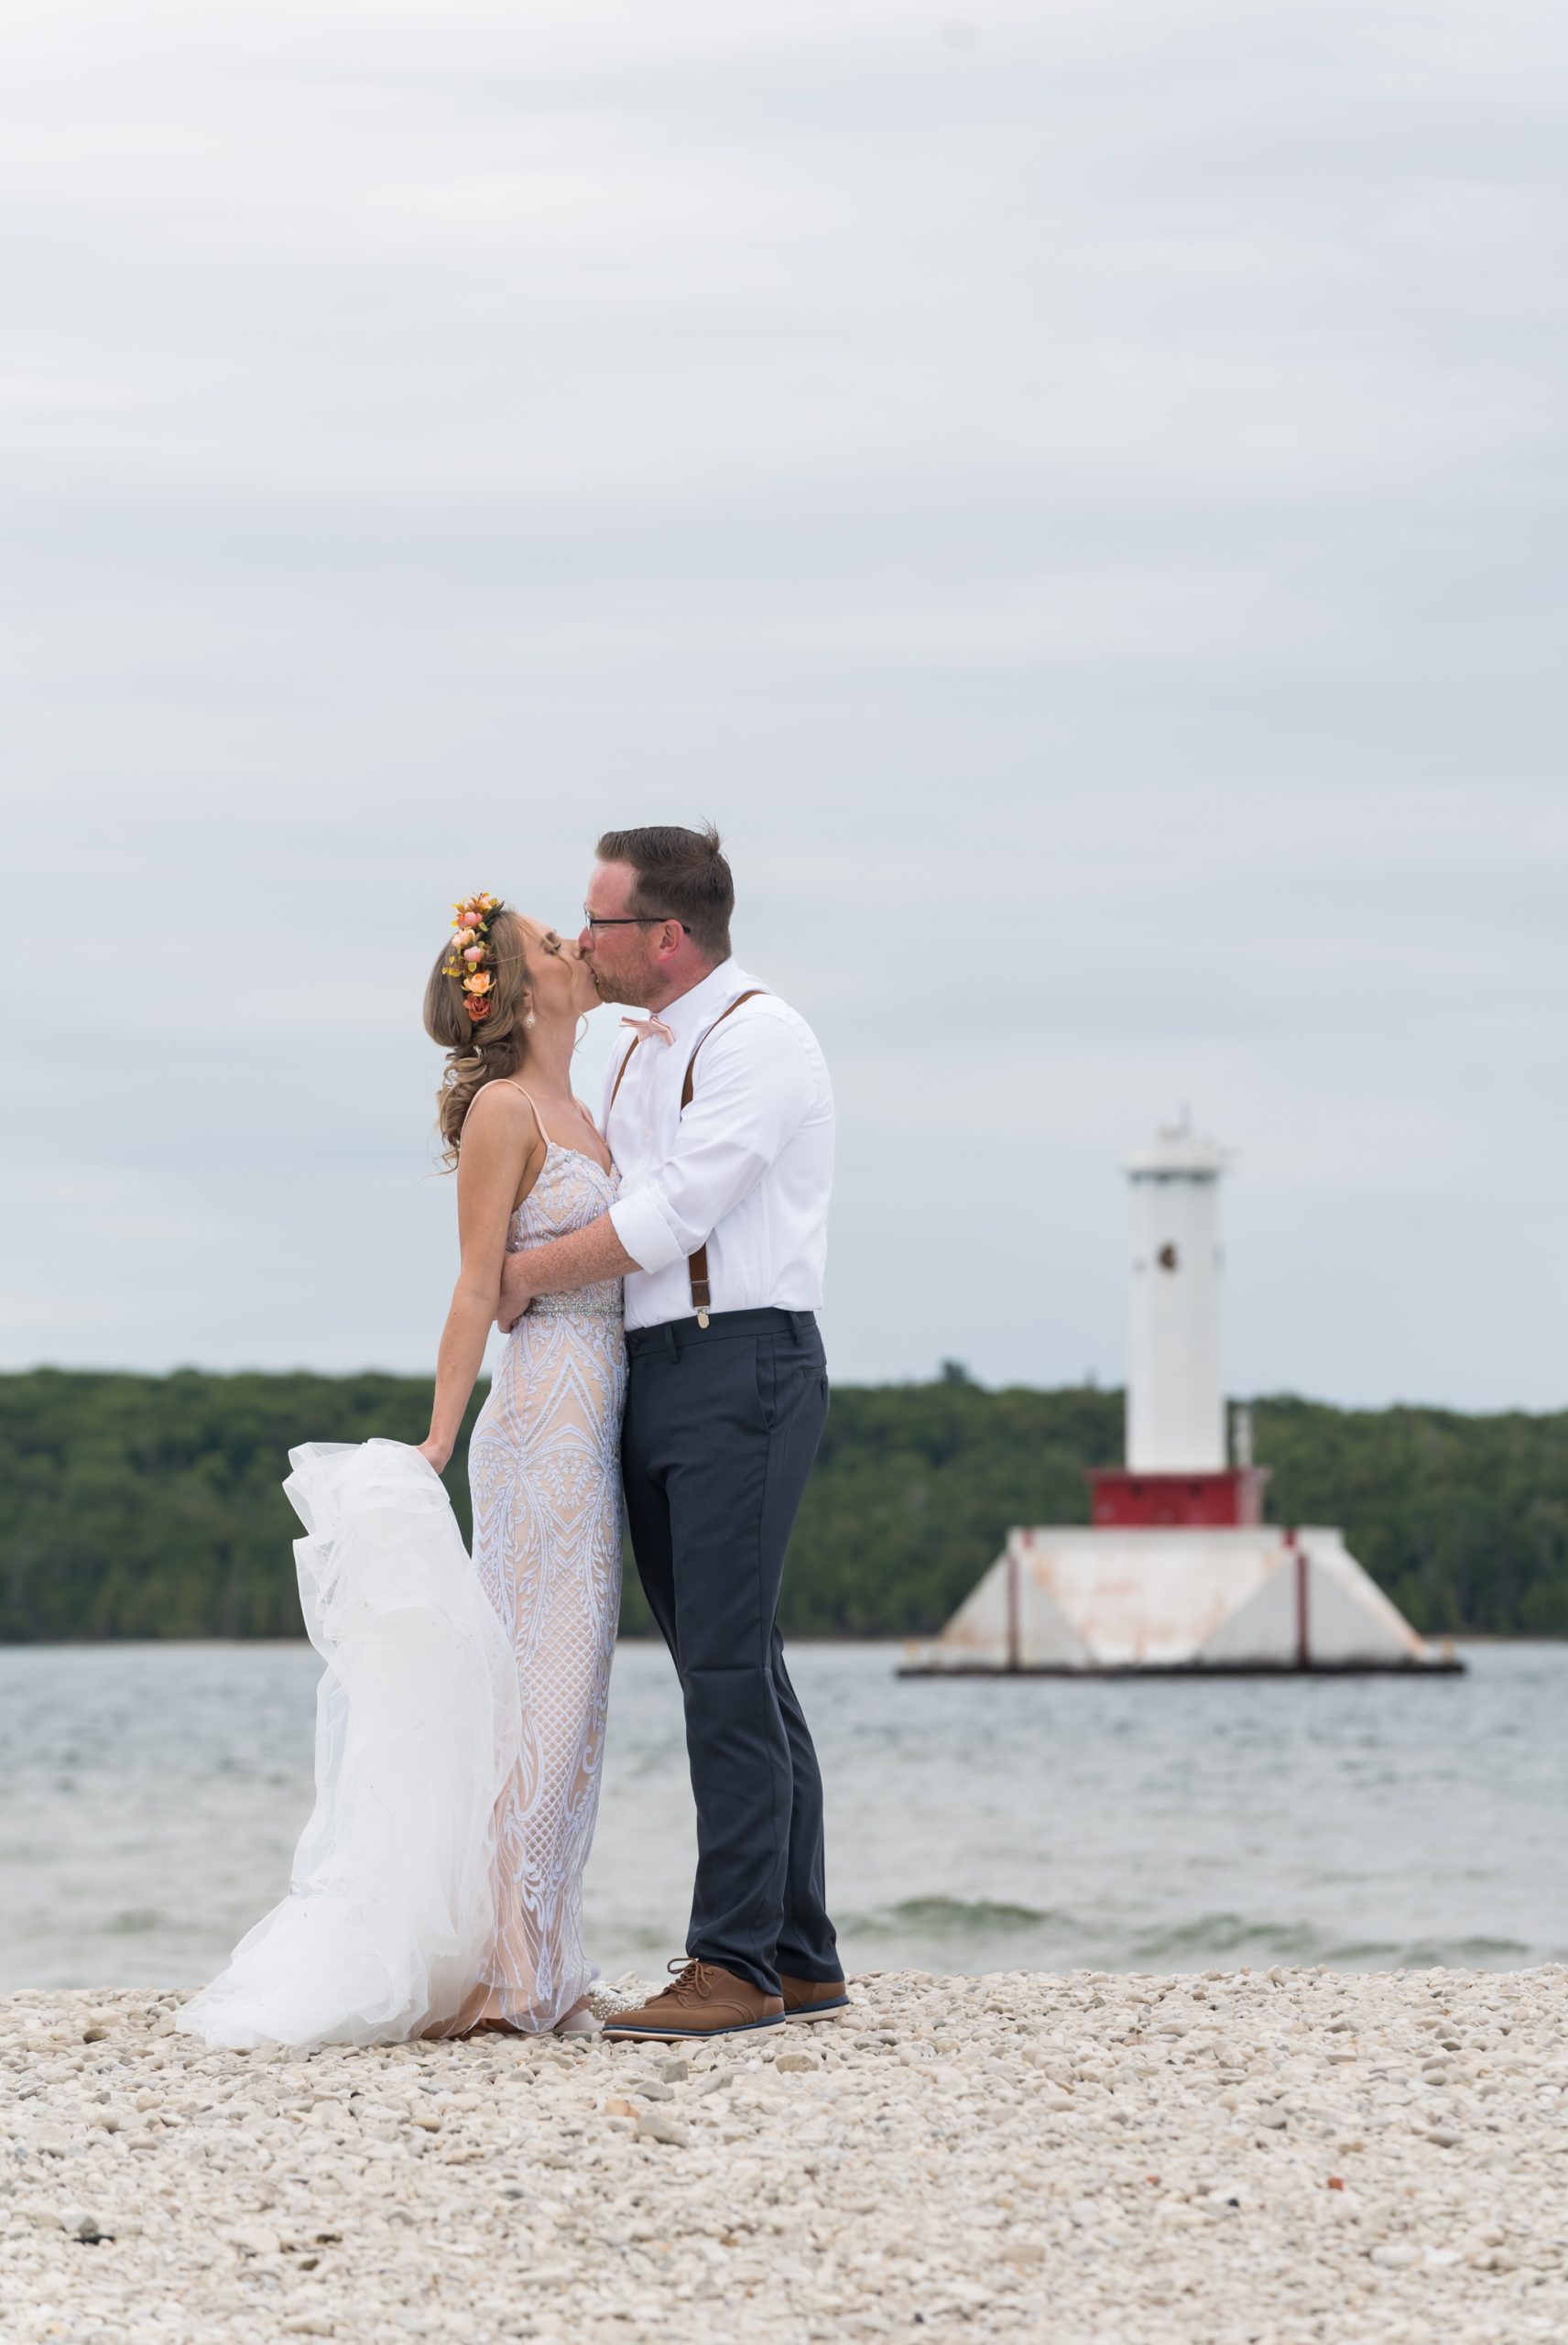 A bride and groom kiss on the shores of Mackinac Island with a lighthouse in the background during their Mission Point Resort wedding.  